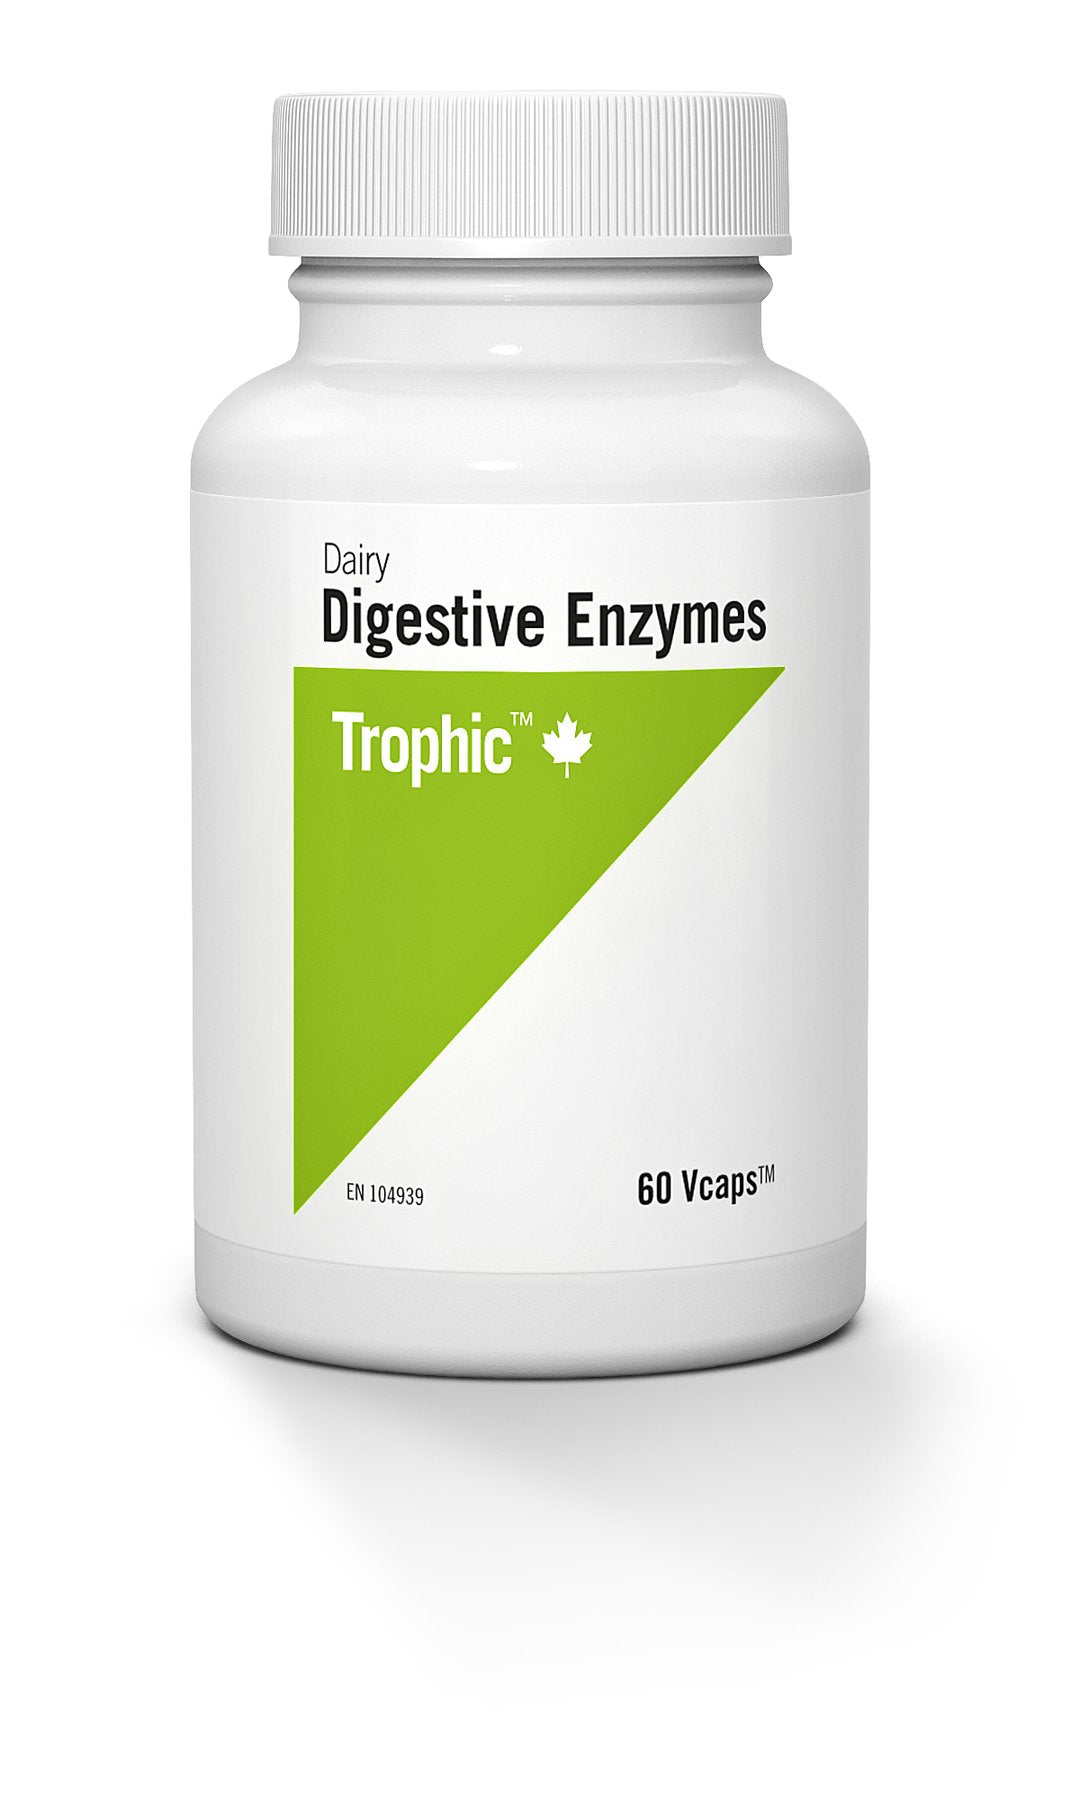 Dairy Digestive Enzyme 60 Vcaps